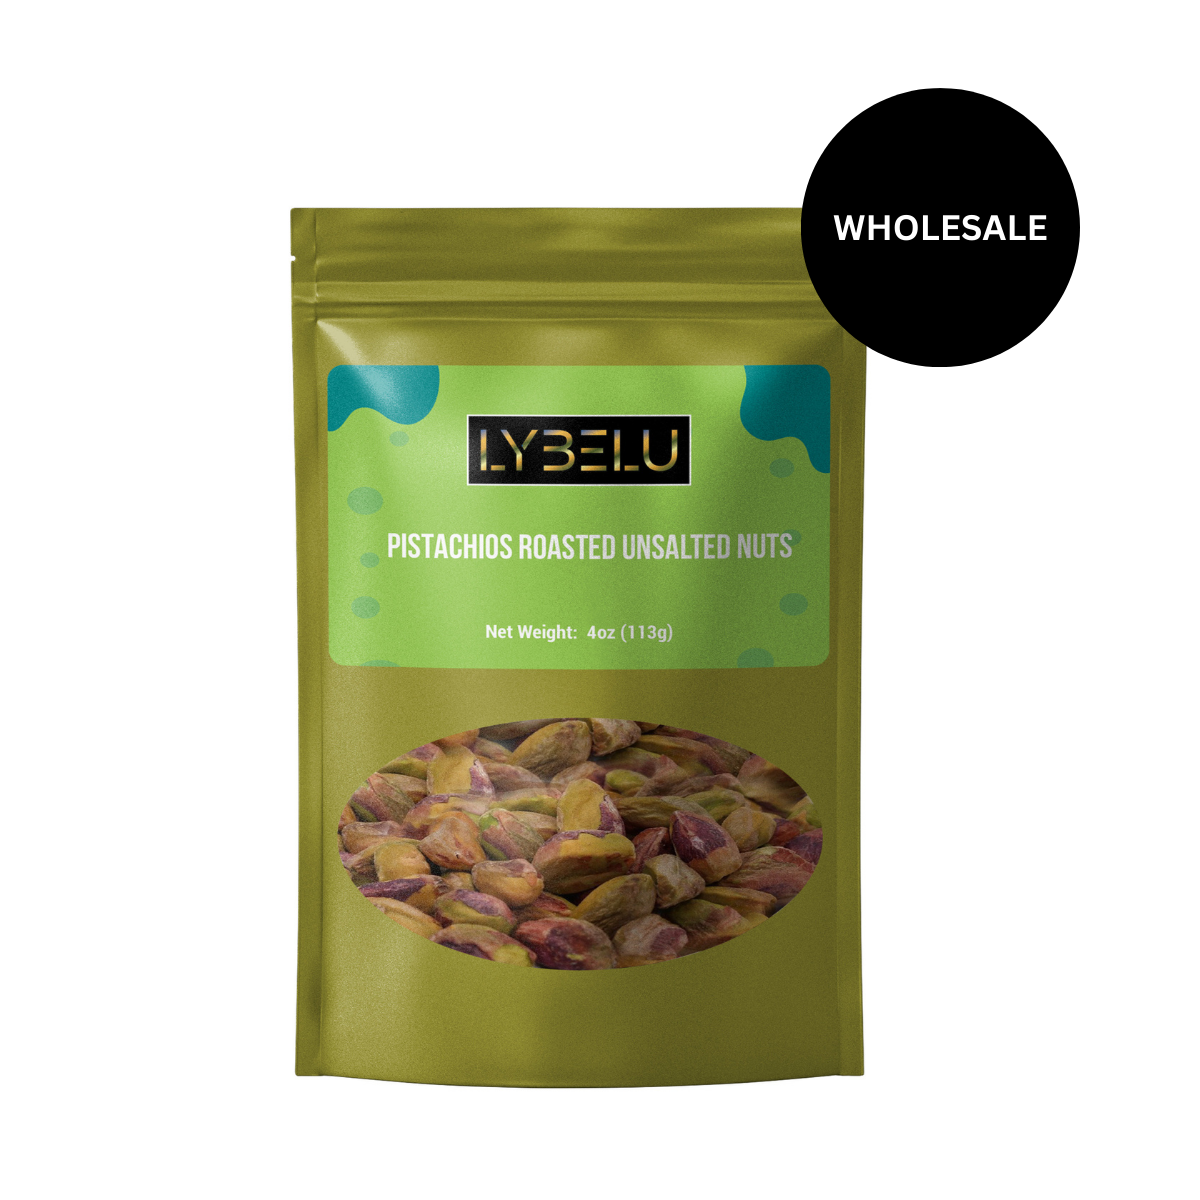 Pistachios Roasted Unsalted Nuts – 4oz